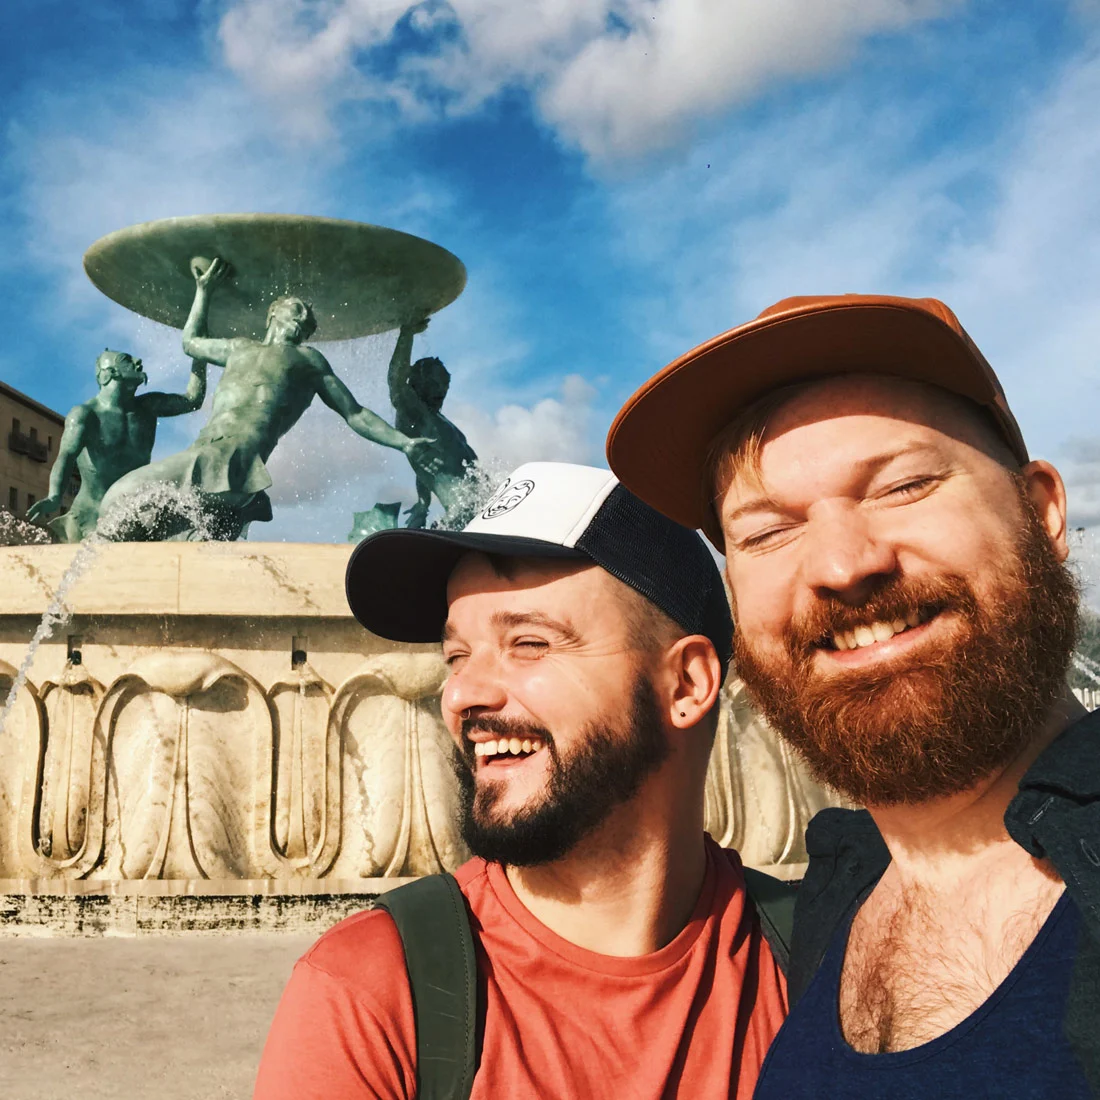 Selfie moment in front of The Triton's Fountain just outside the City Gate of Valletta © Coupleofmen.com